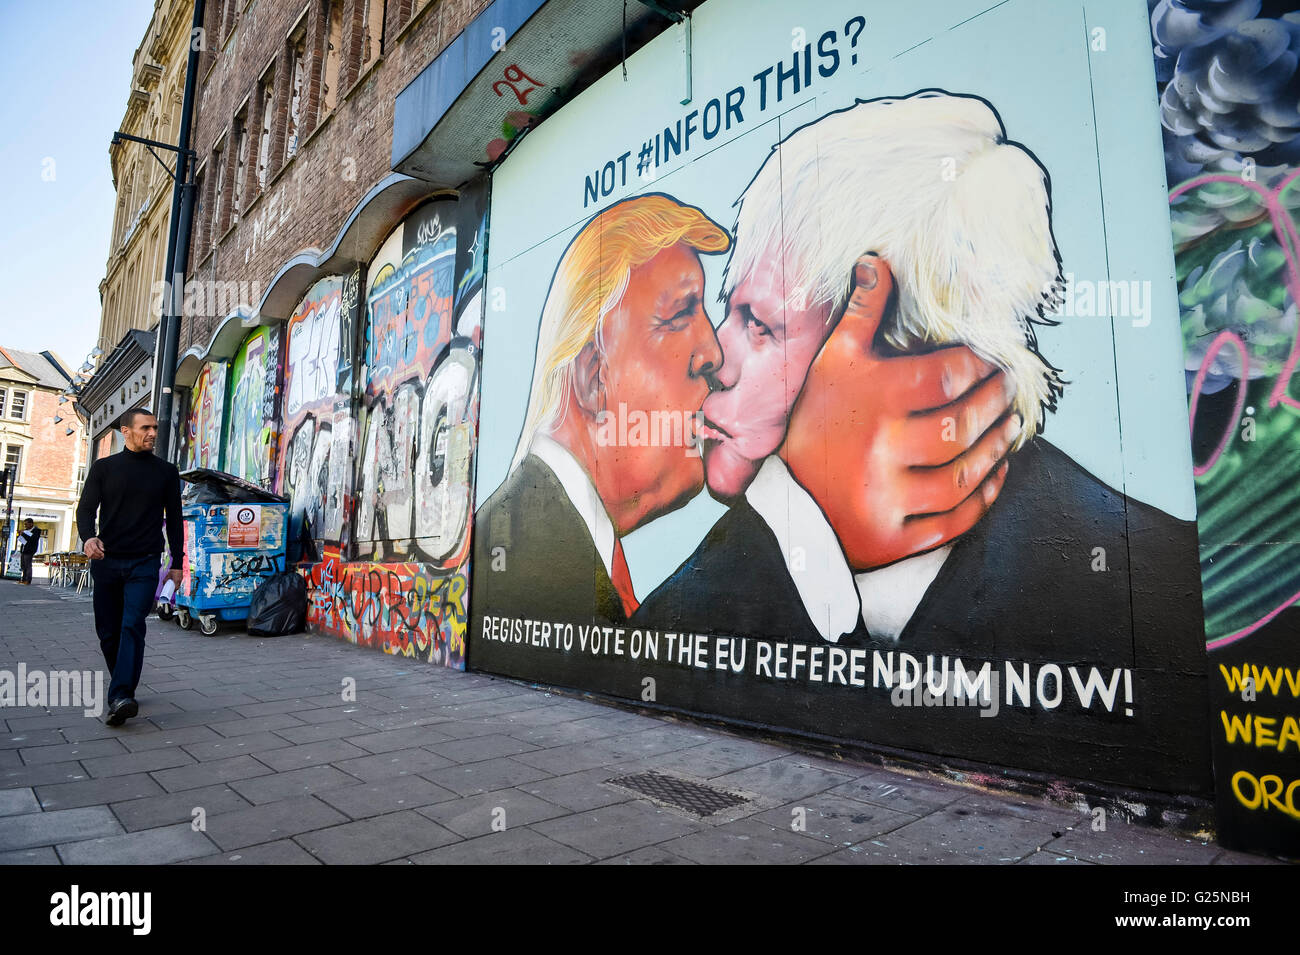 A man walks past a graffiti mural of Donald Trump and Boris Johnson kissing, which is sprayed on a disused building in the Stokes Croft area of Bristol. Stock Photo